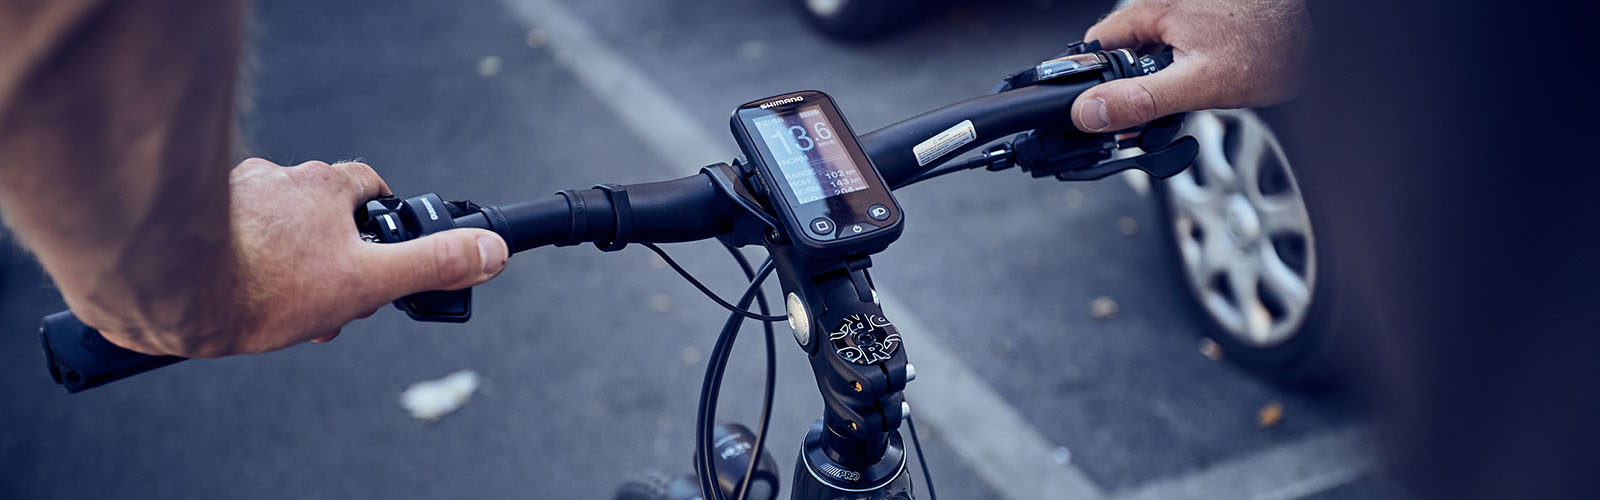 How to use your e-bike modes to improve your fitness